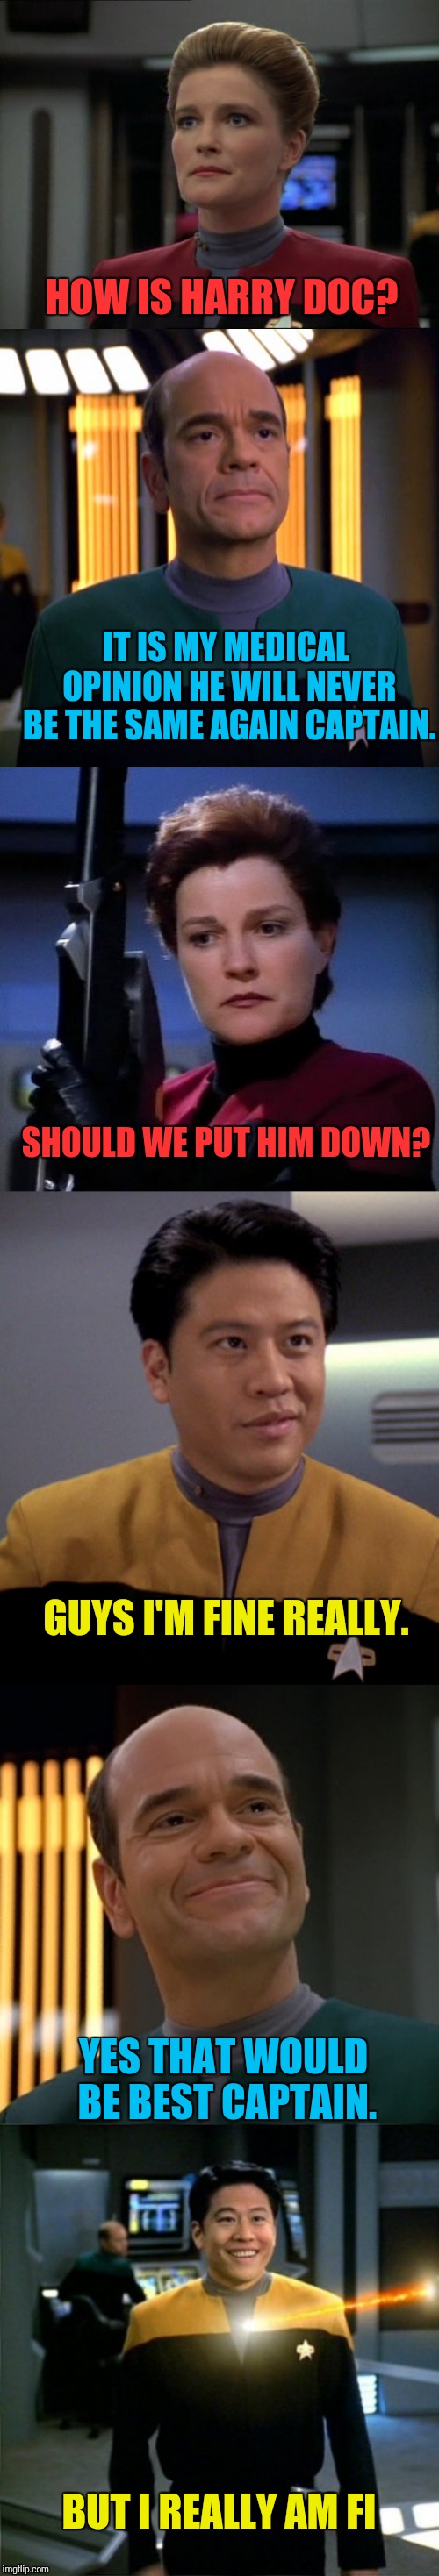 Old Yeller Style | HOW IS HARRY DOC? IT IS MY MEDICAL OPINION HE WILL NEVER BE THE SAME AGAIN CAPTAIN. SHOULD WE PUT HIM DOWN? GUYS I'M FINE REALLY. YES THAT WOULD BE BEST CAPTAIN. BUT I REALLY AM FI | image tagged in star trek voyager,the doctor,janeway,euthanasia | made w/ Imgflip meme maker